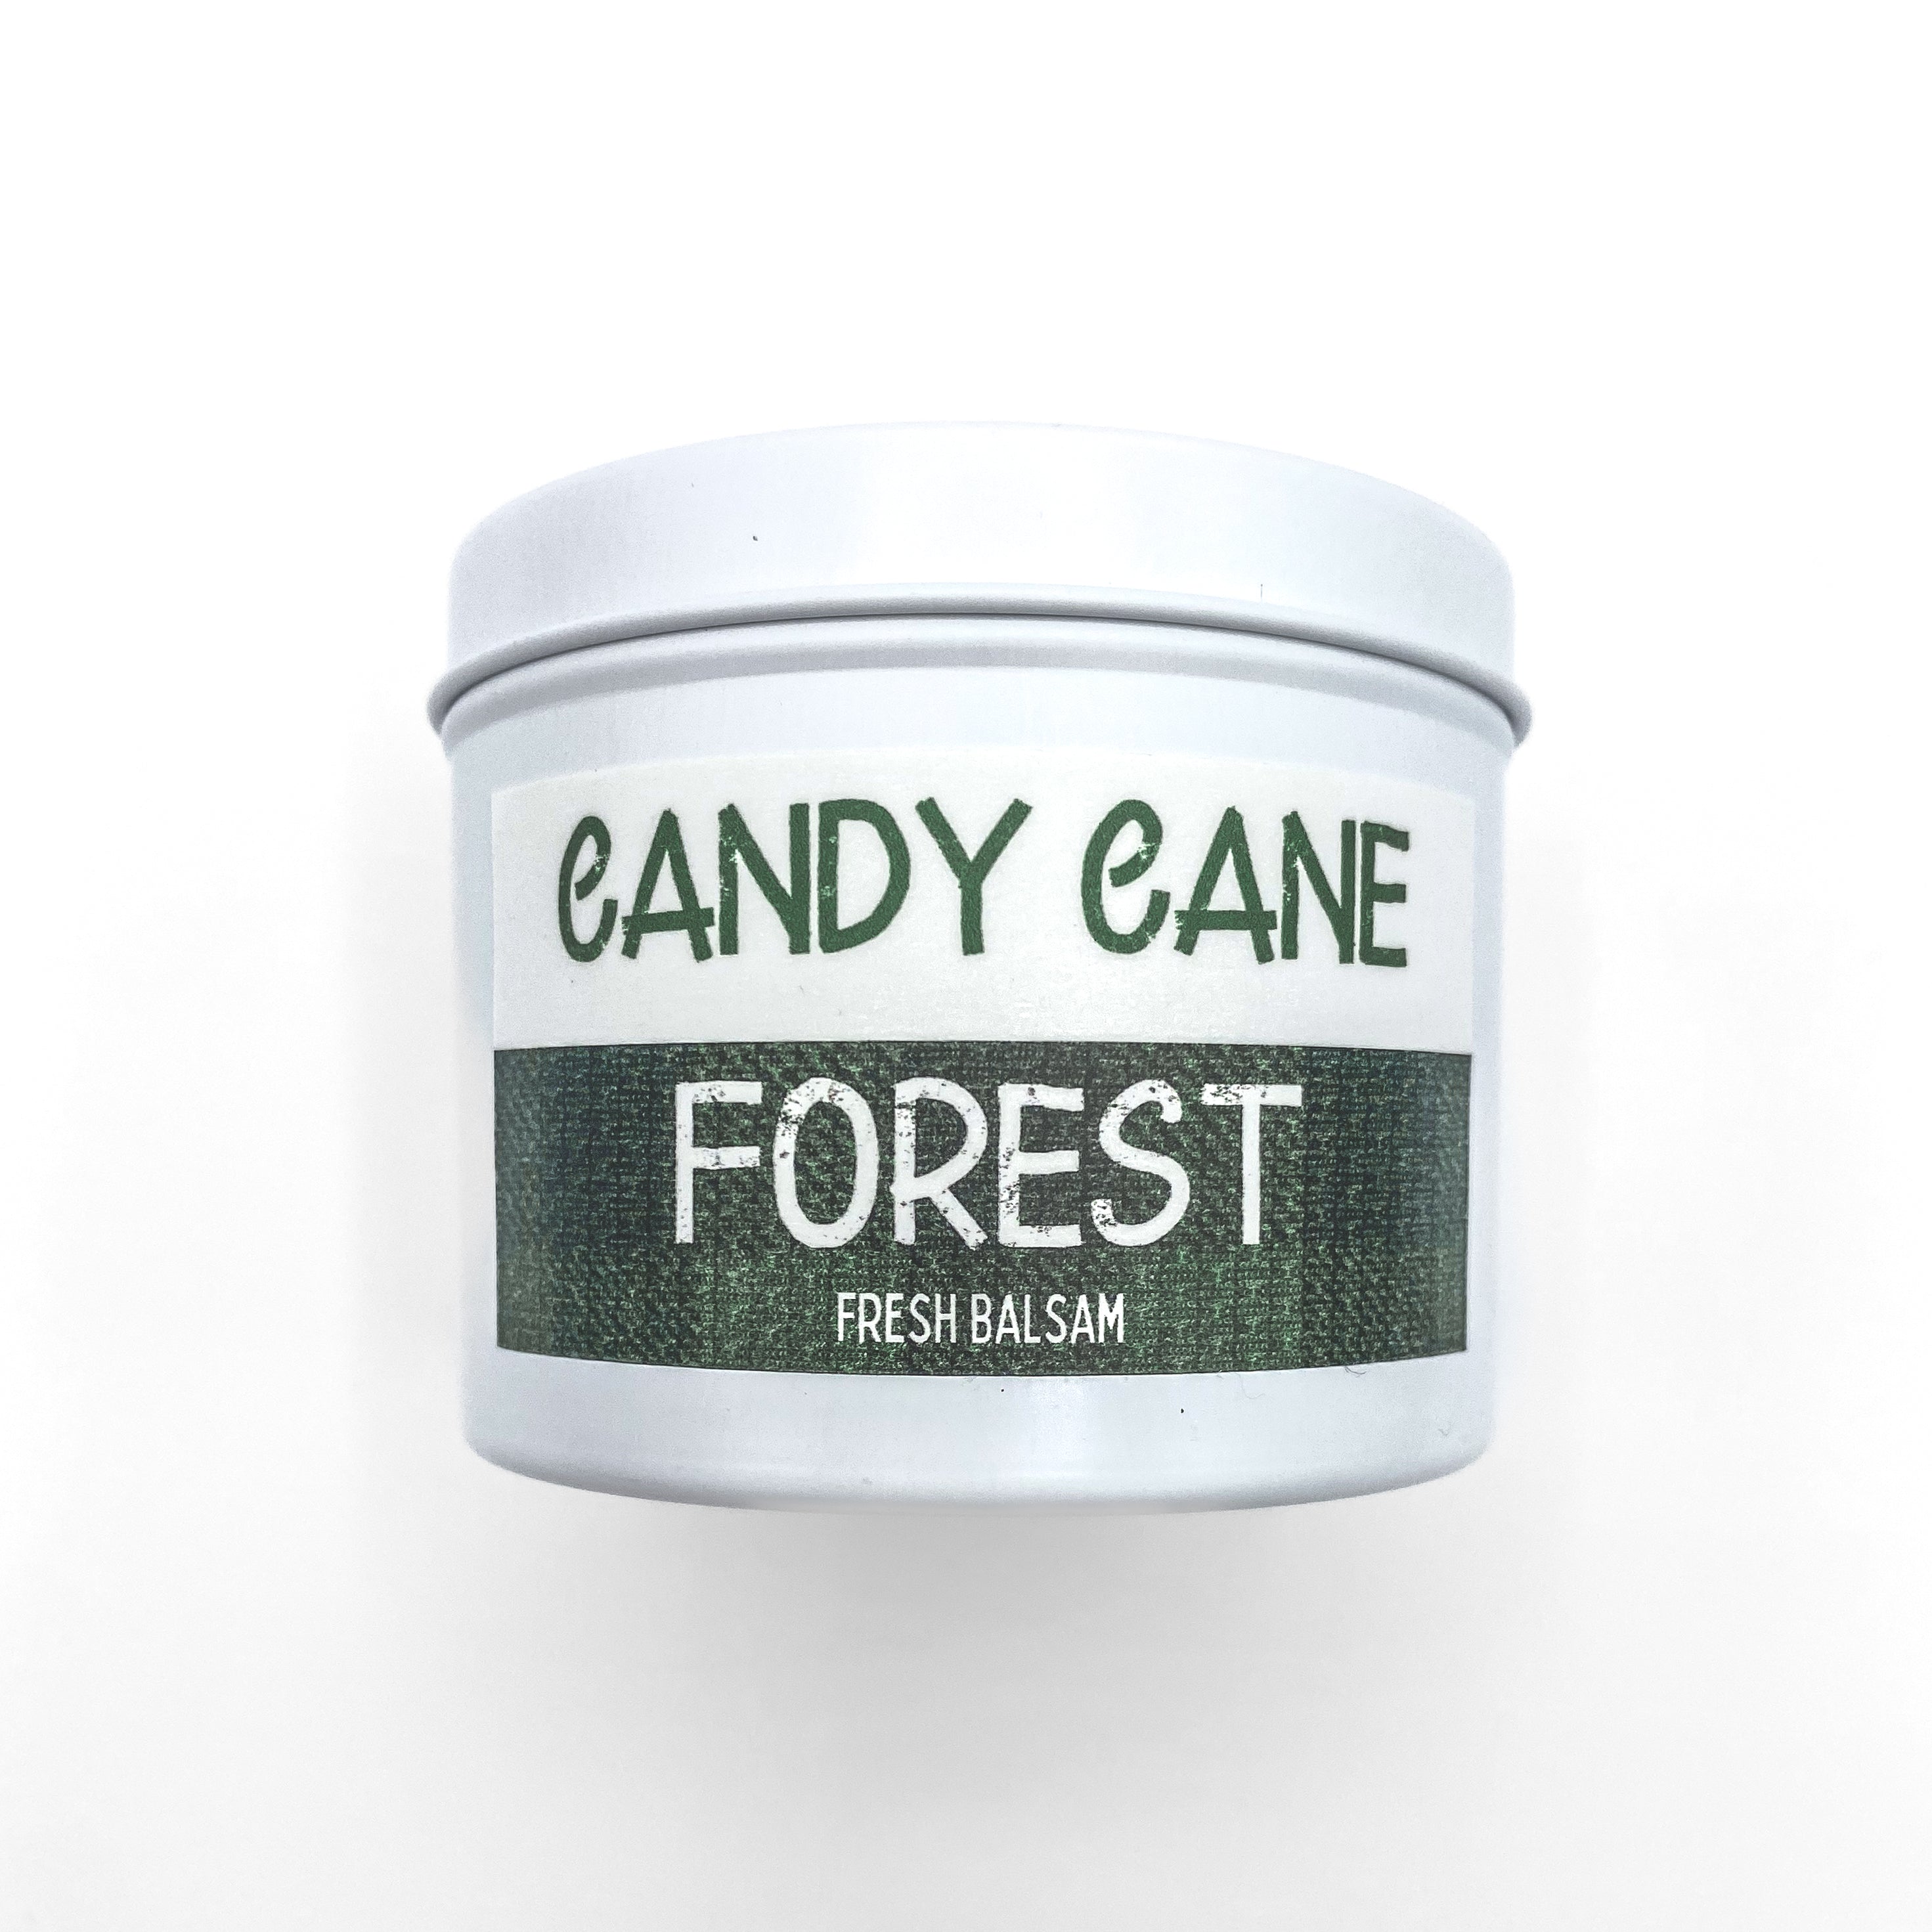 THE DAILY HOME | Candy Cane Forest Candle